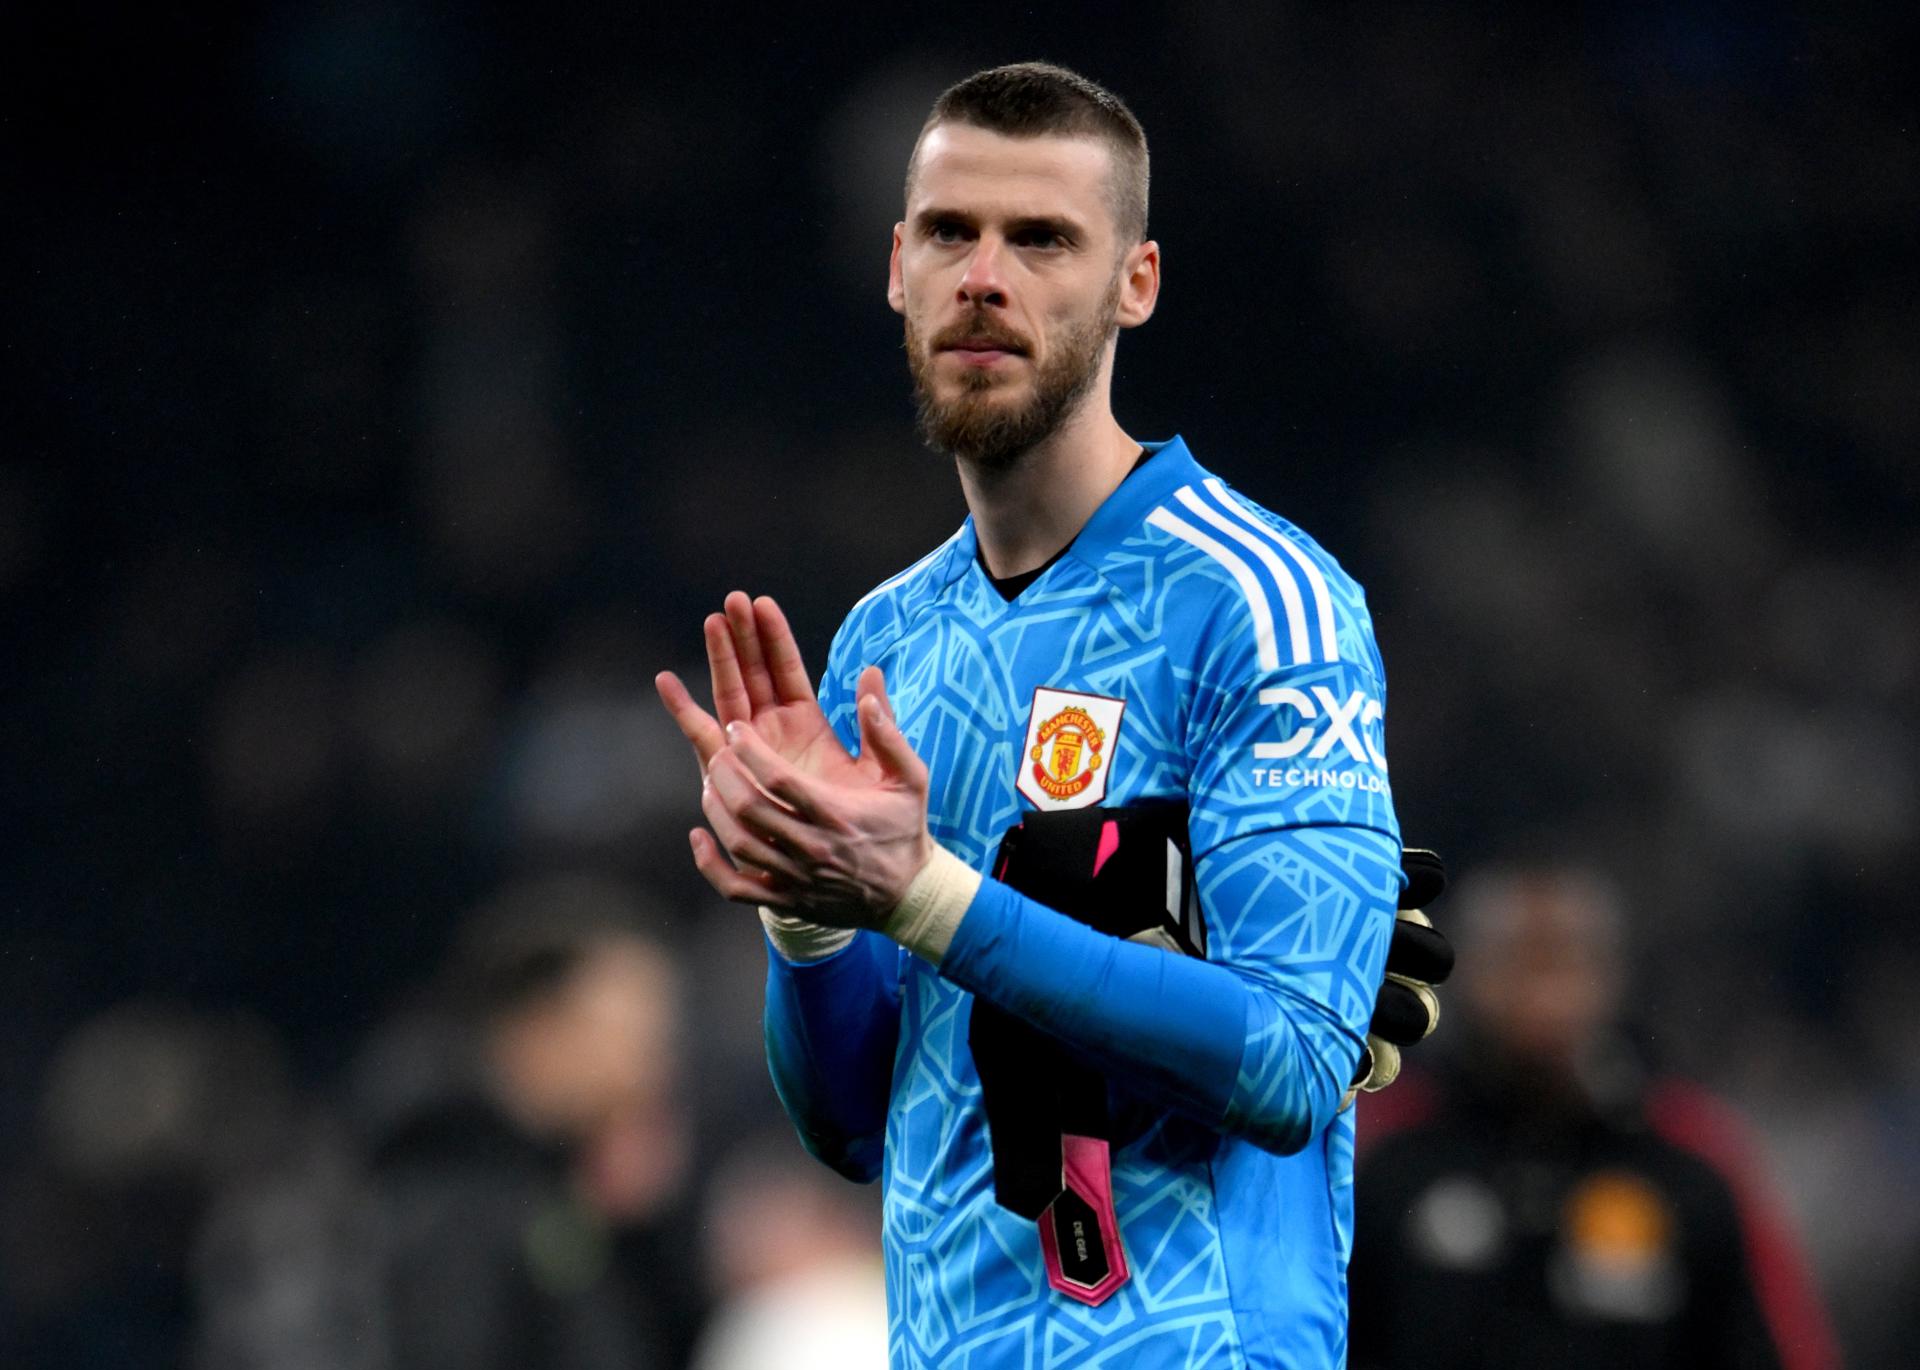 De Gea considers retirement if he doesn't receive offer from top club